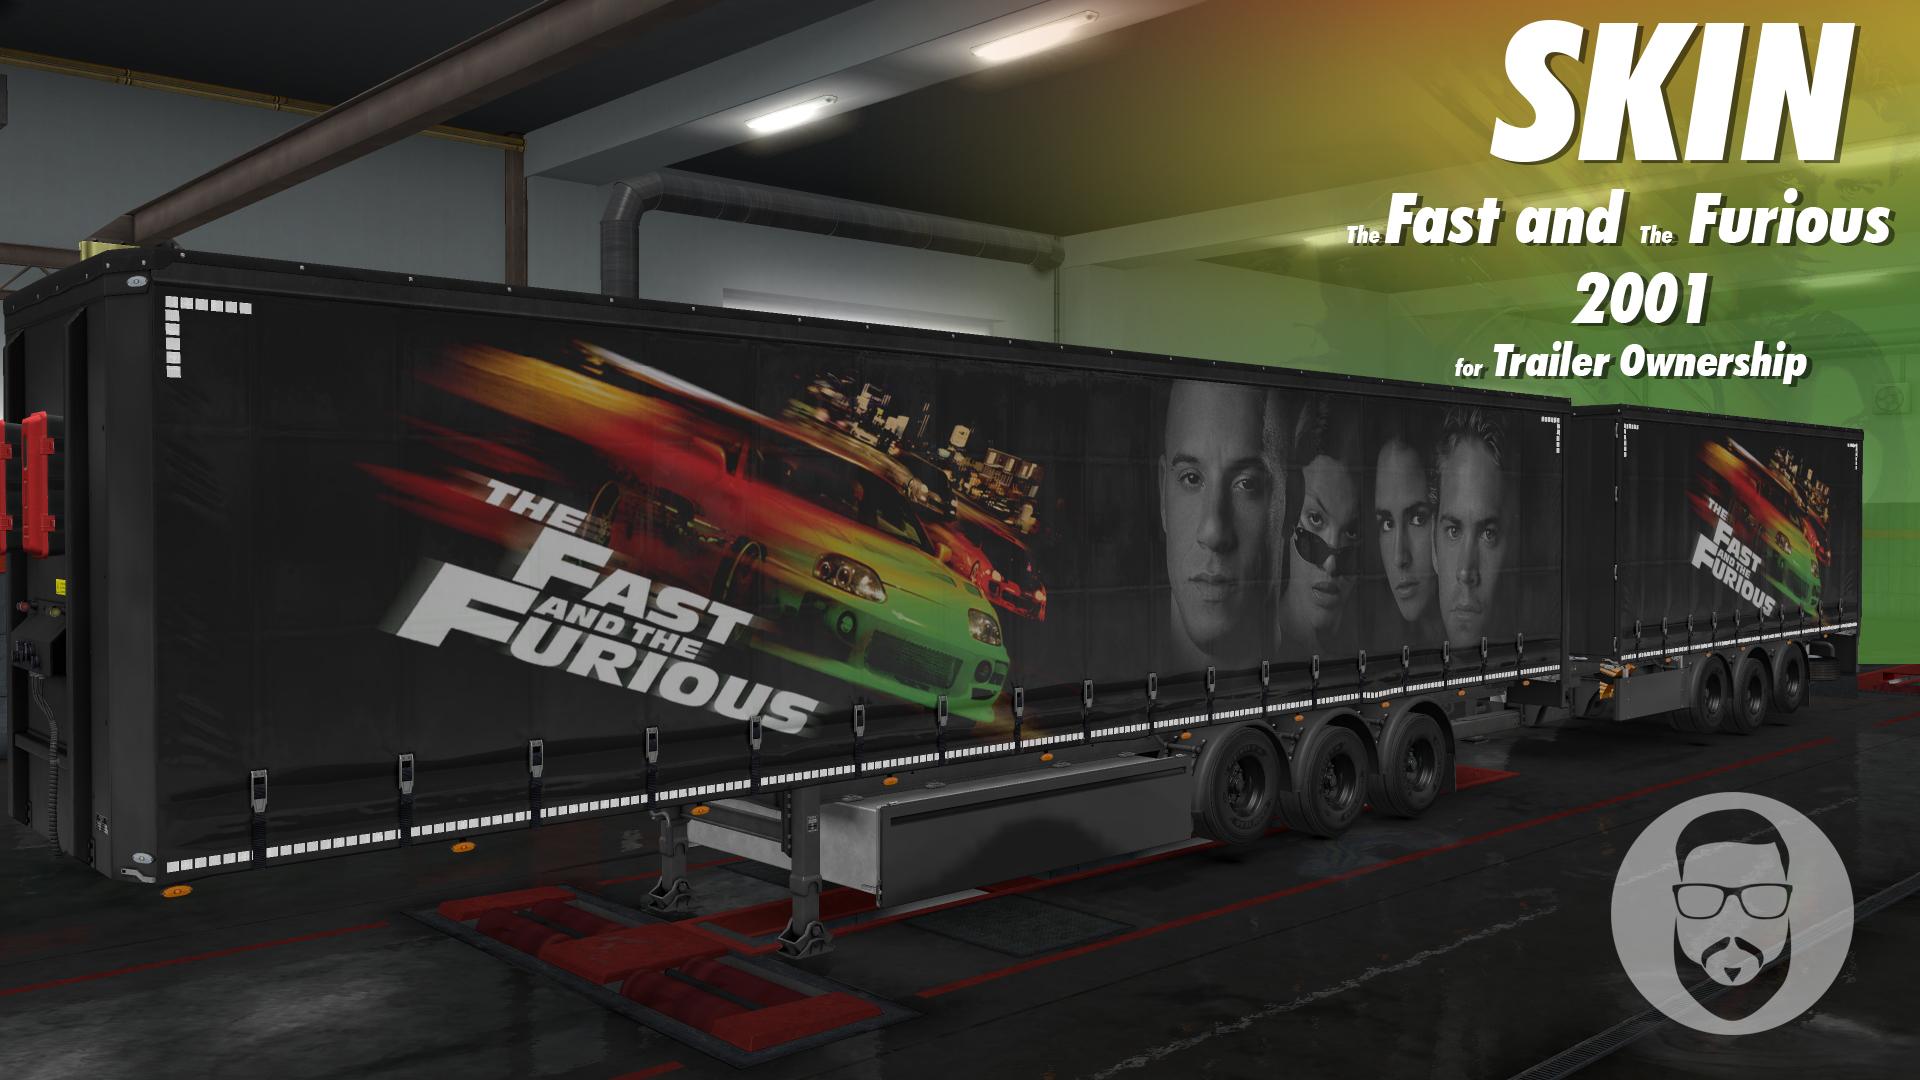 Skin The Fast and The Furious (2001) for Trailer Ownership v1.0 ets2